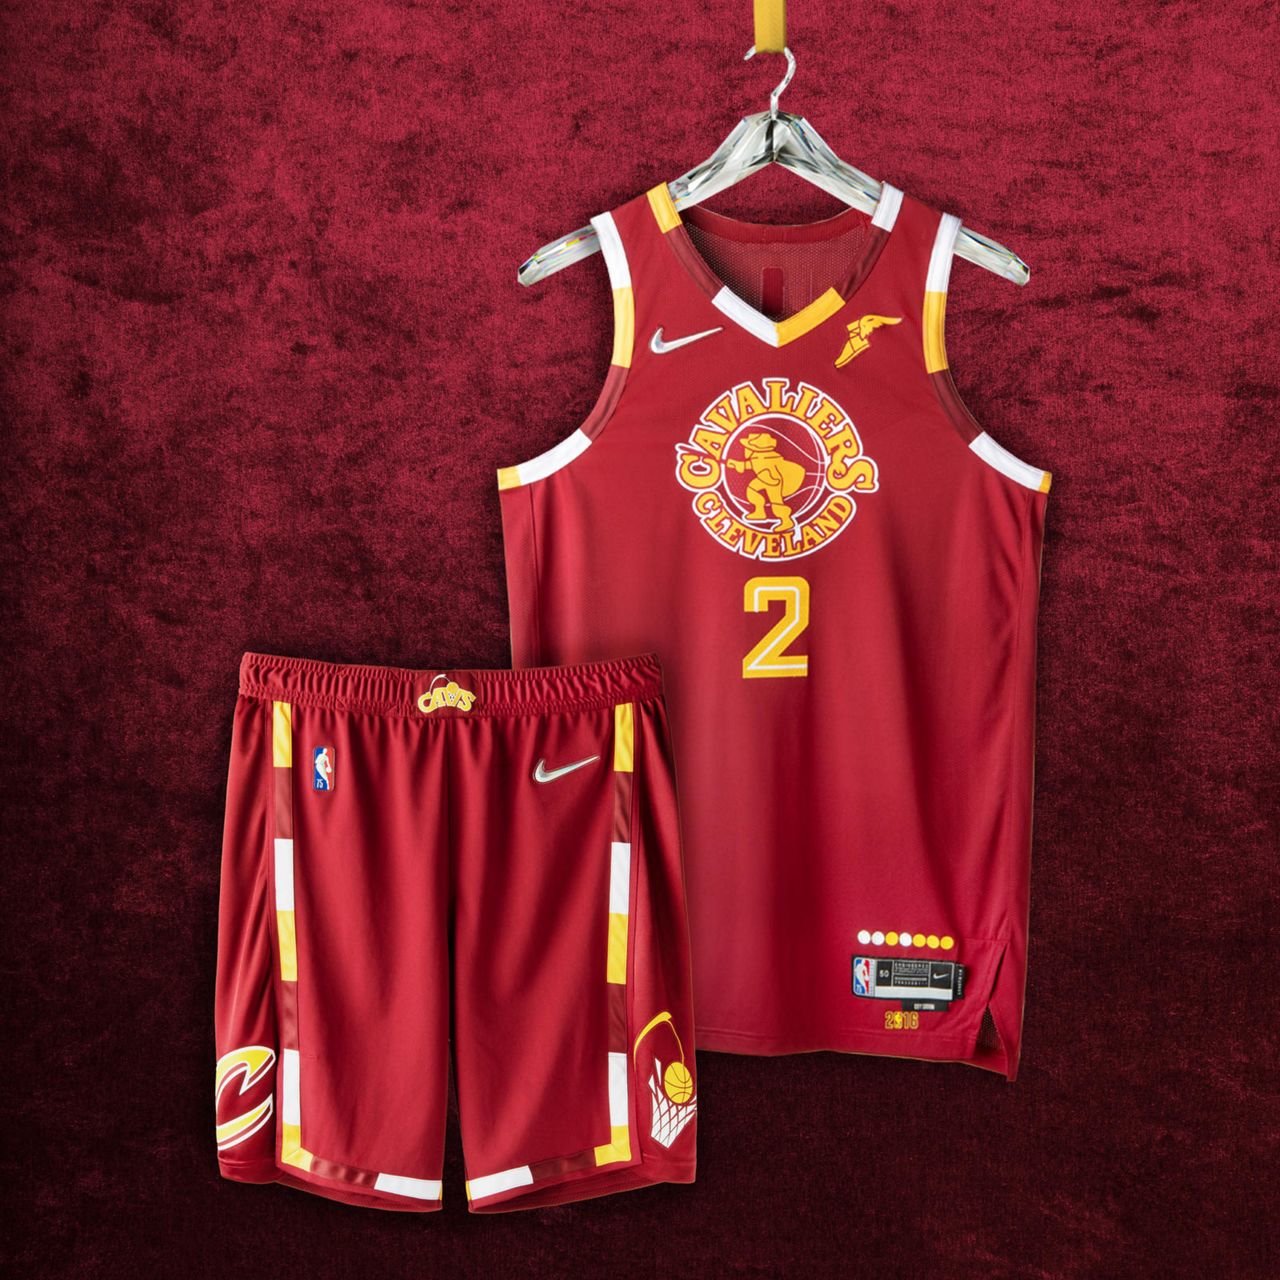 NBA news 2020: Cleveland Cavaliers City Edition uniform, Rock & Roll Hall  of Fame